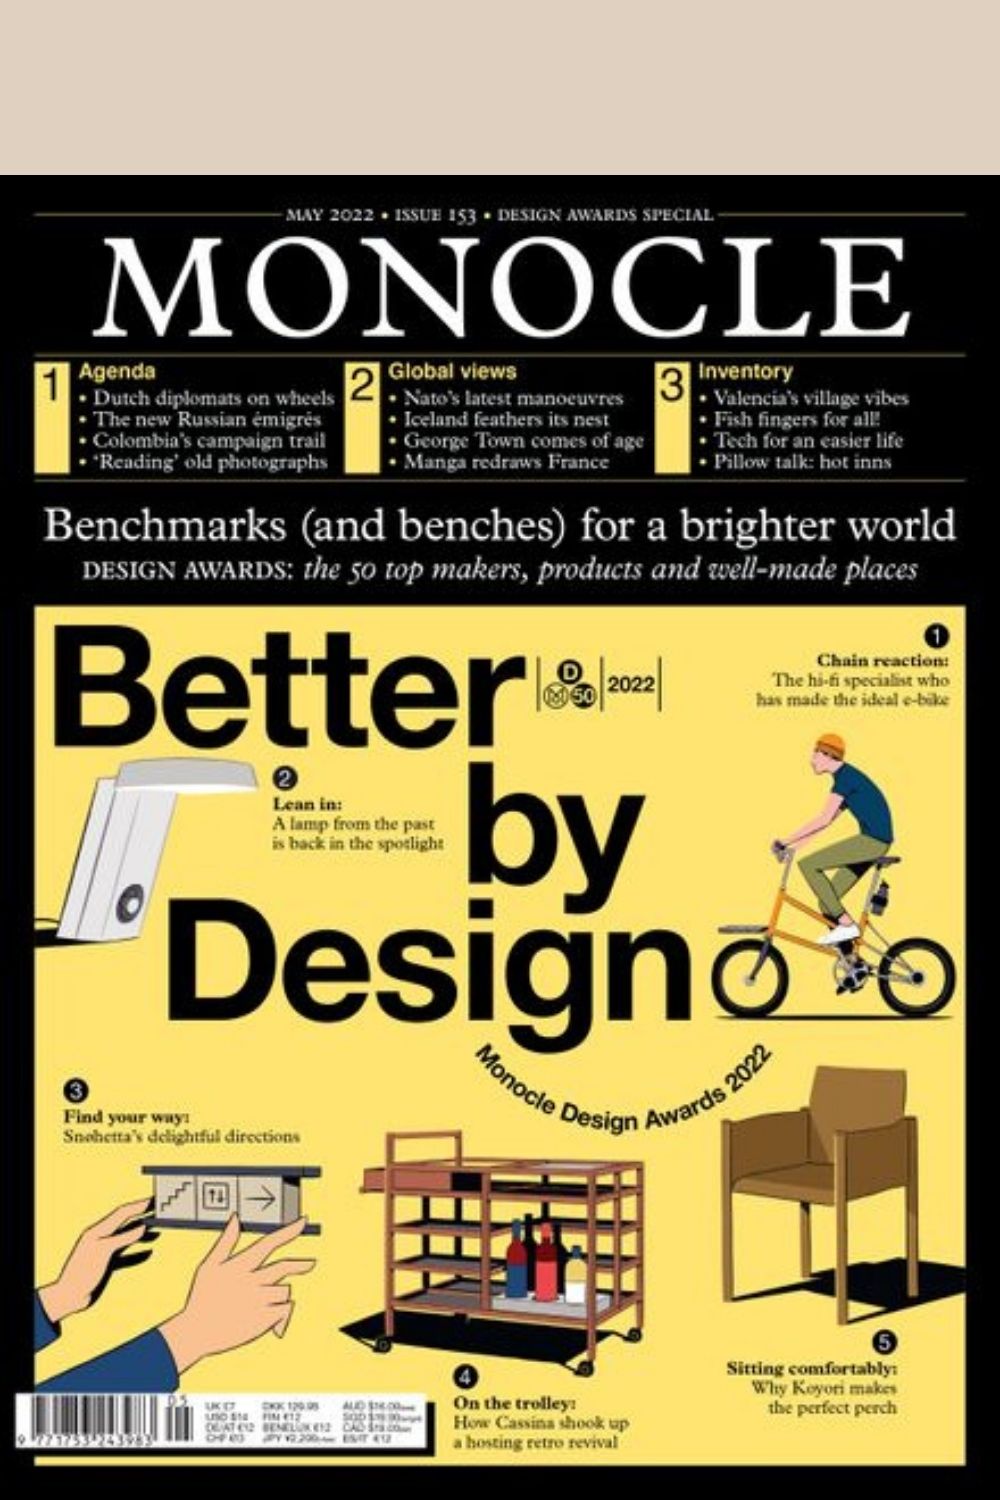 Monocle Issue 153 May 2022